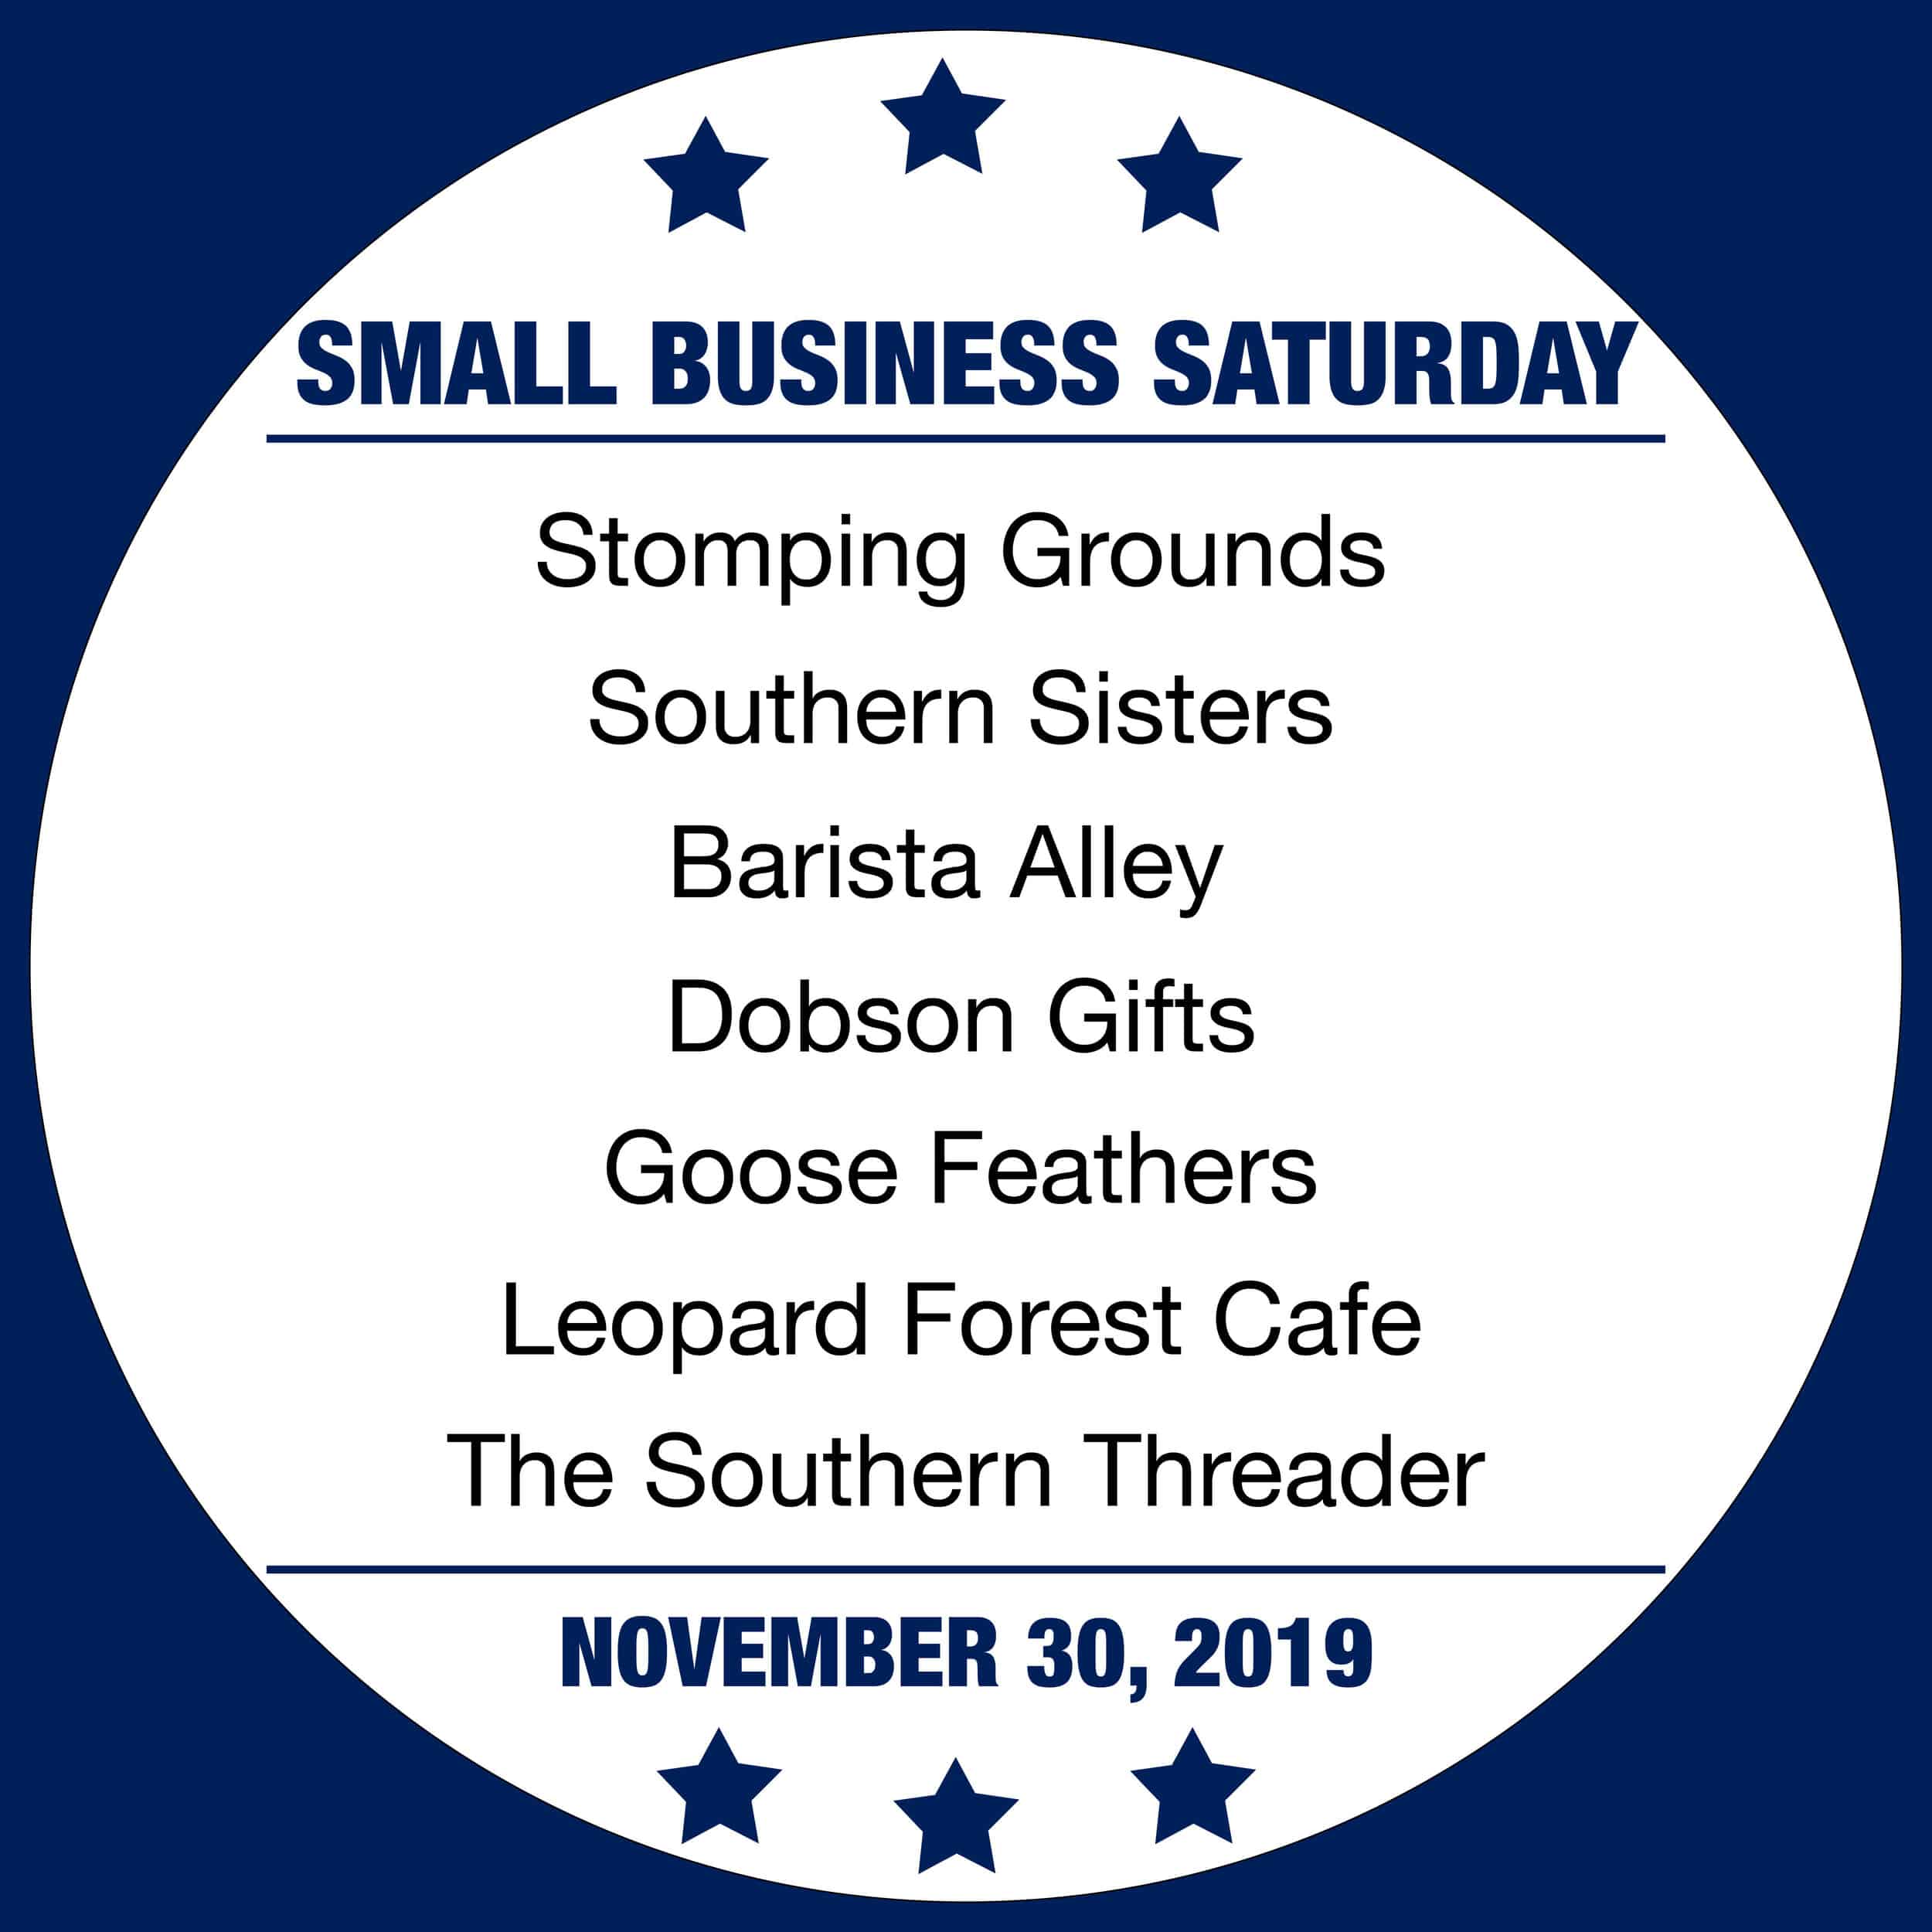 Celebrate Small Bussiness Saturday, November 30, 2019. Visit these local shops located in Greer, Greenville, Taylors, and Travelers Rest.